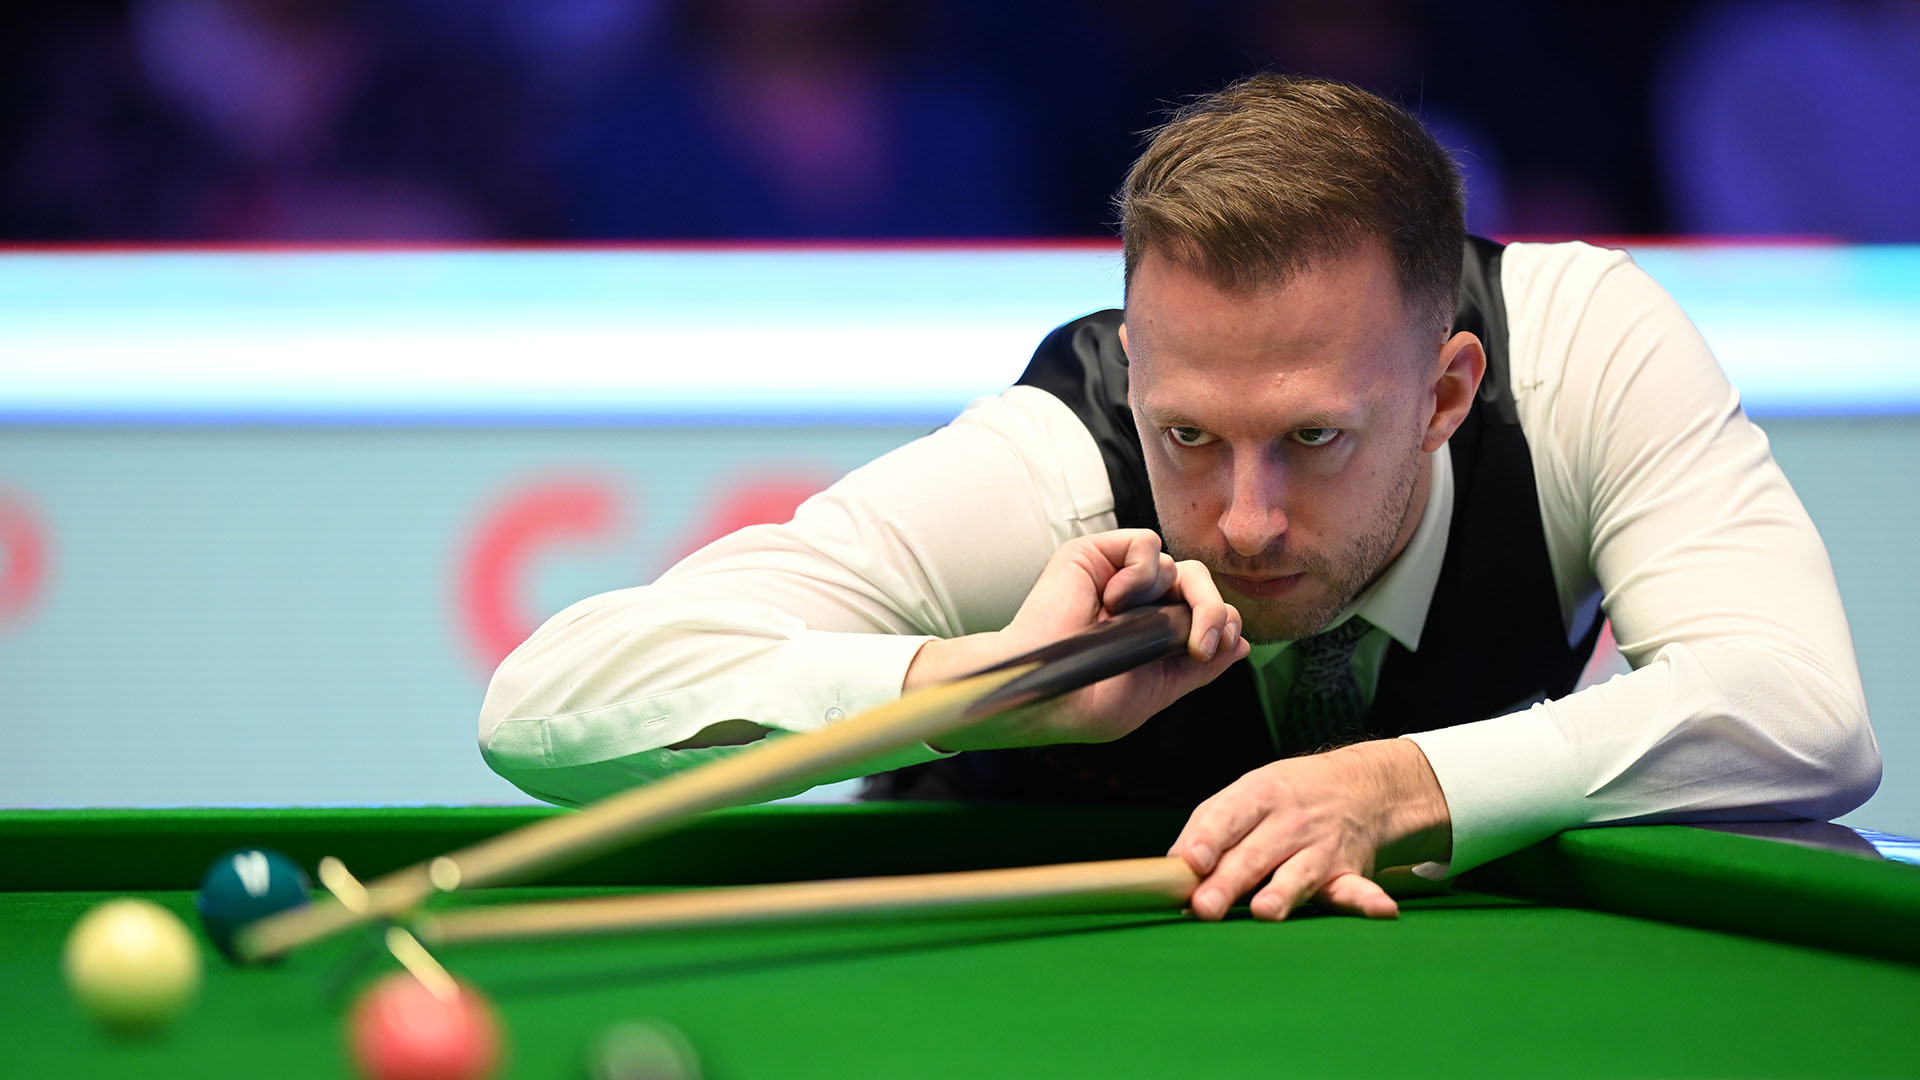 Snooker results Judd Trump reaches Masters semi-finals after victory over Barry Hawkins